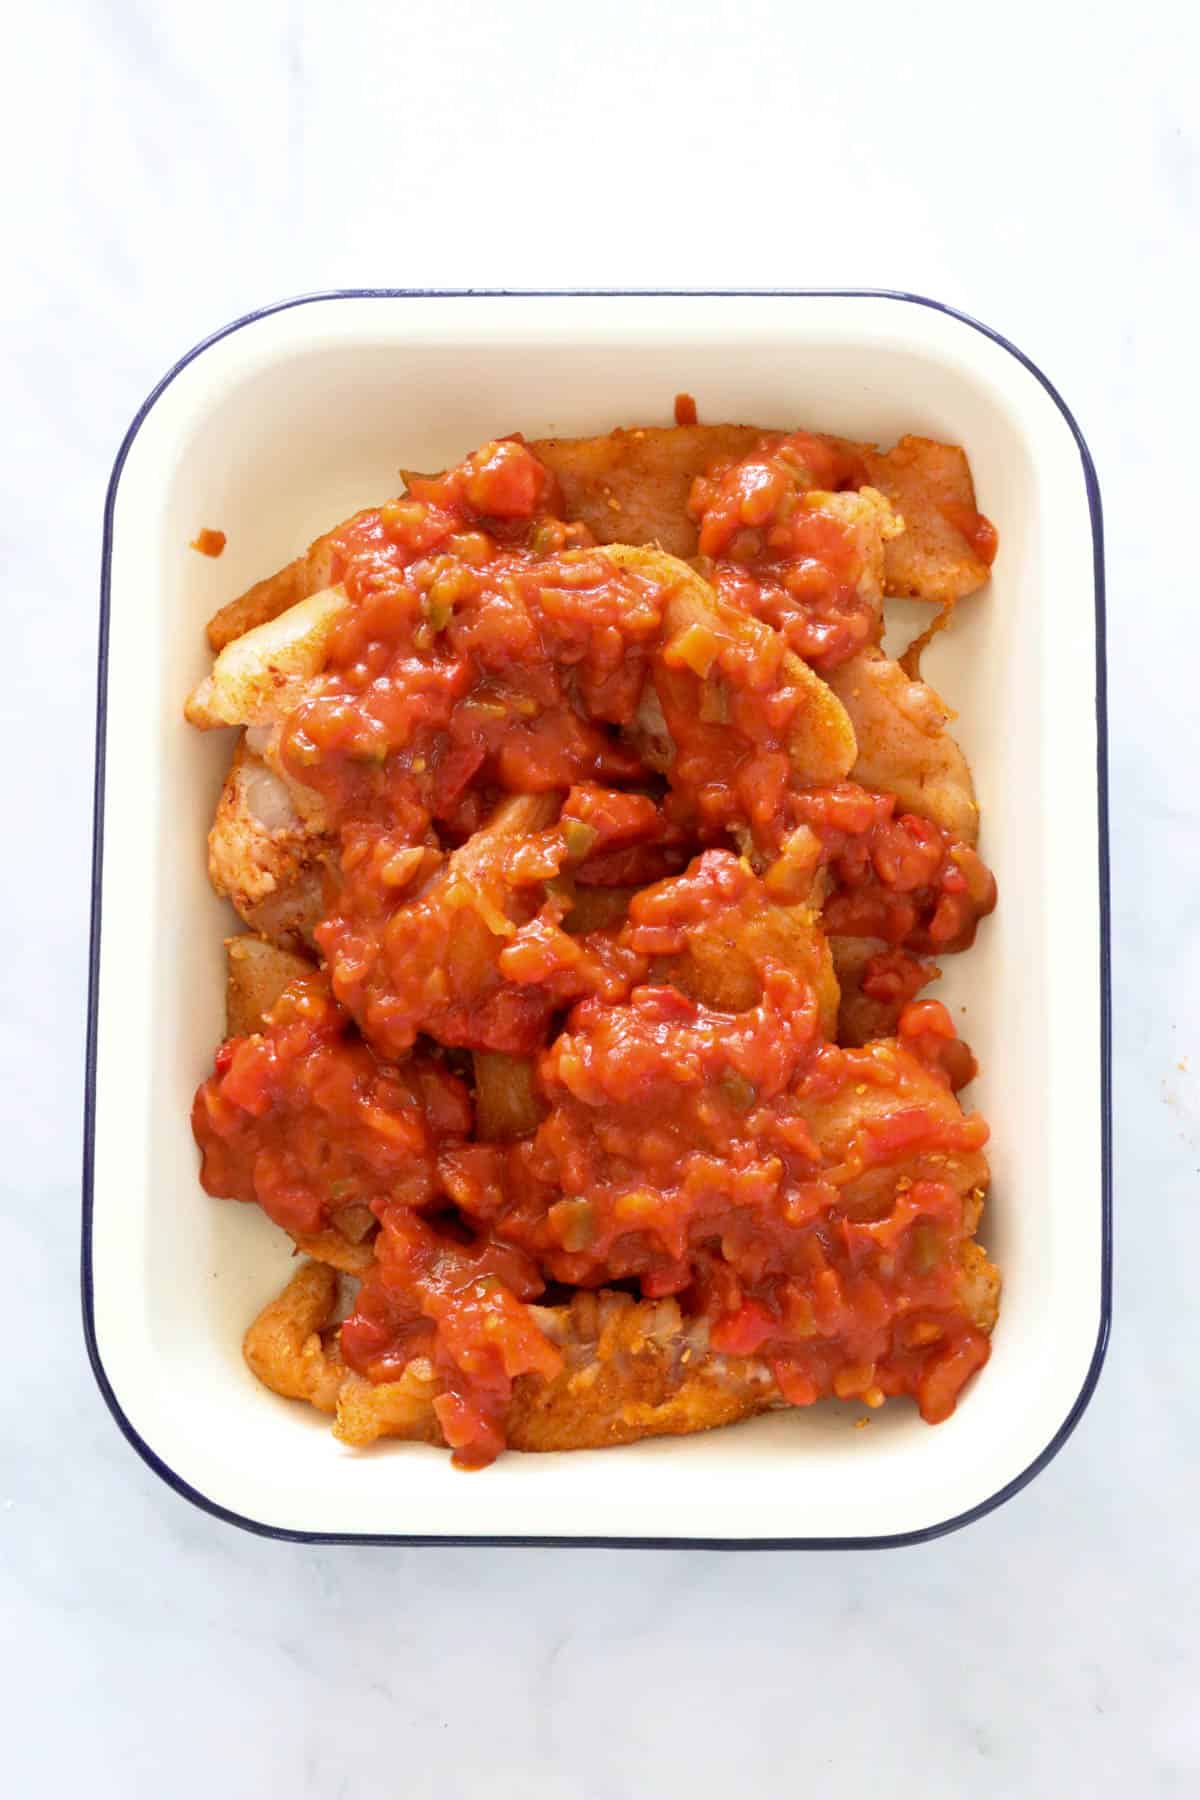 Salsa on top of spicy chicken pieces in a baking dish.